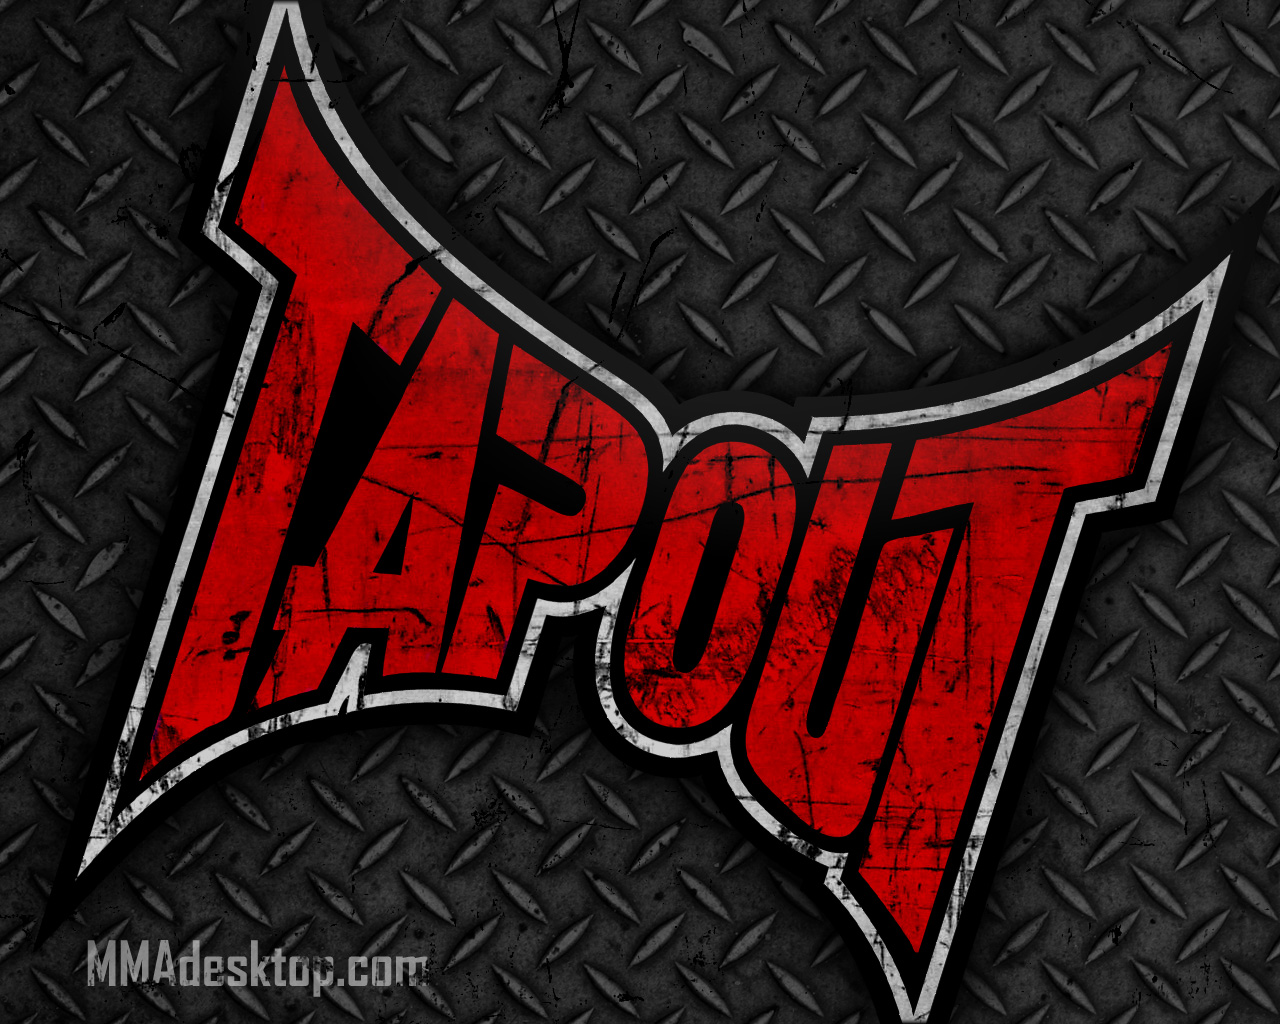 Sports Mma Mixed Martial Arts Tapout Wallpaper